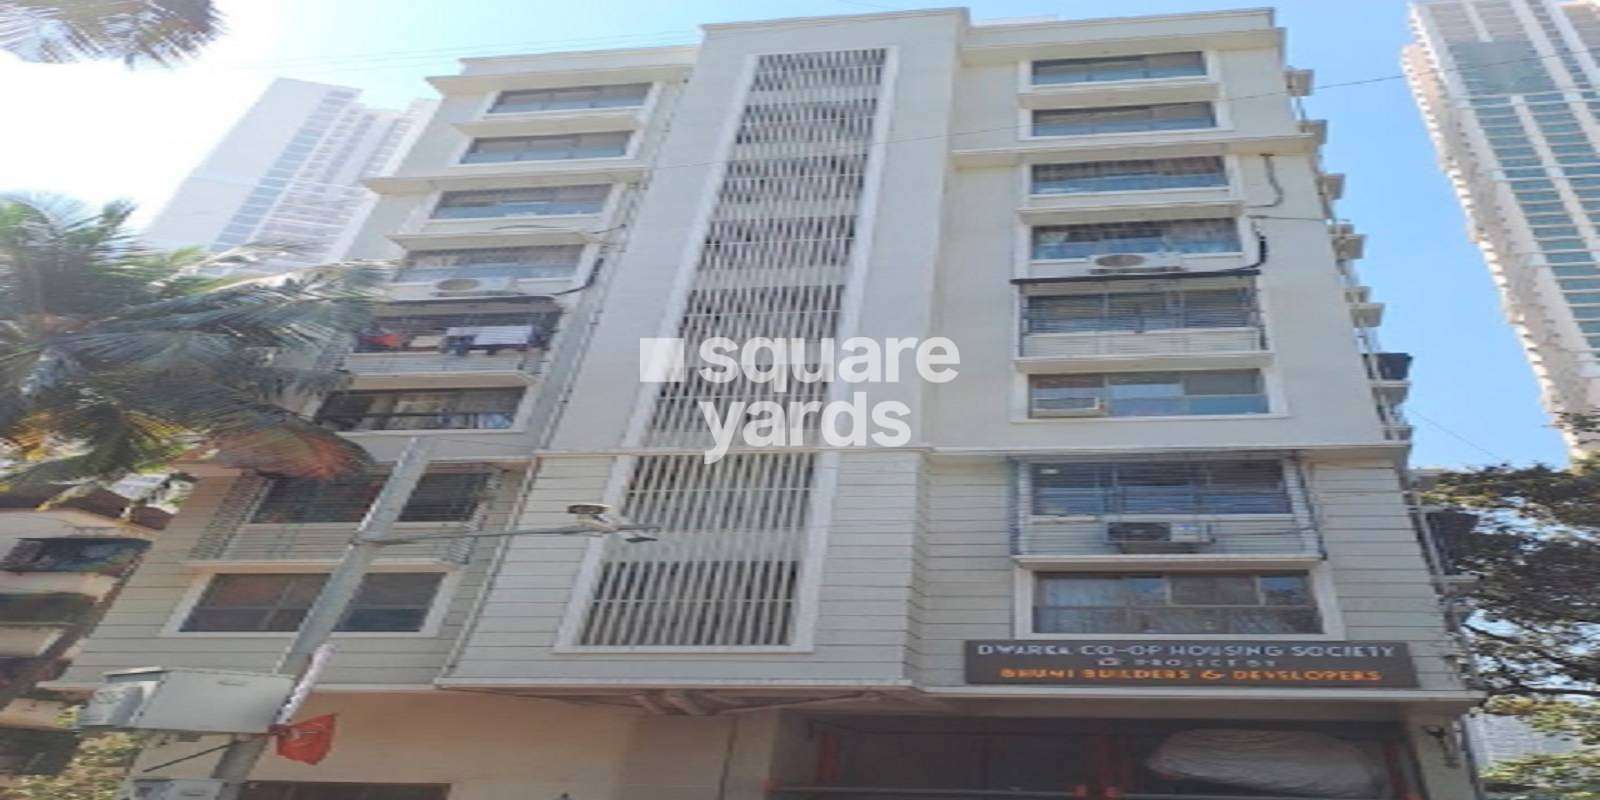 Dwarka Apartments Cover Image